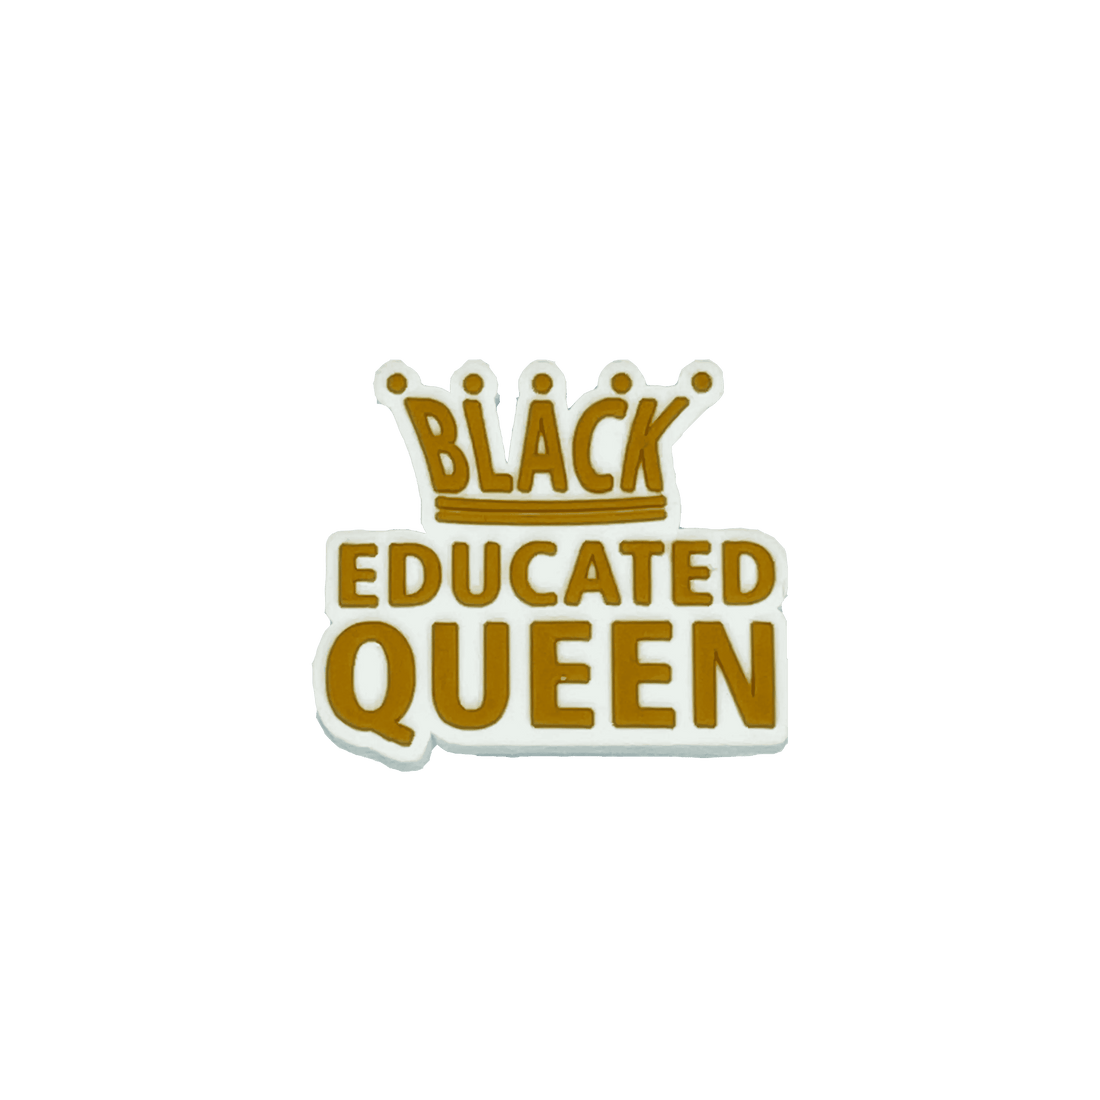 Black Educated Queen Charm Charms By Prince